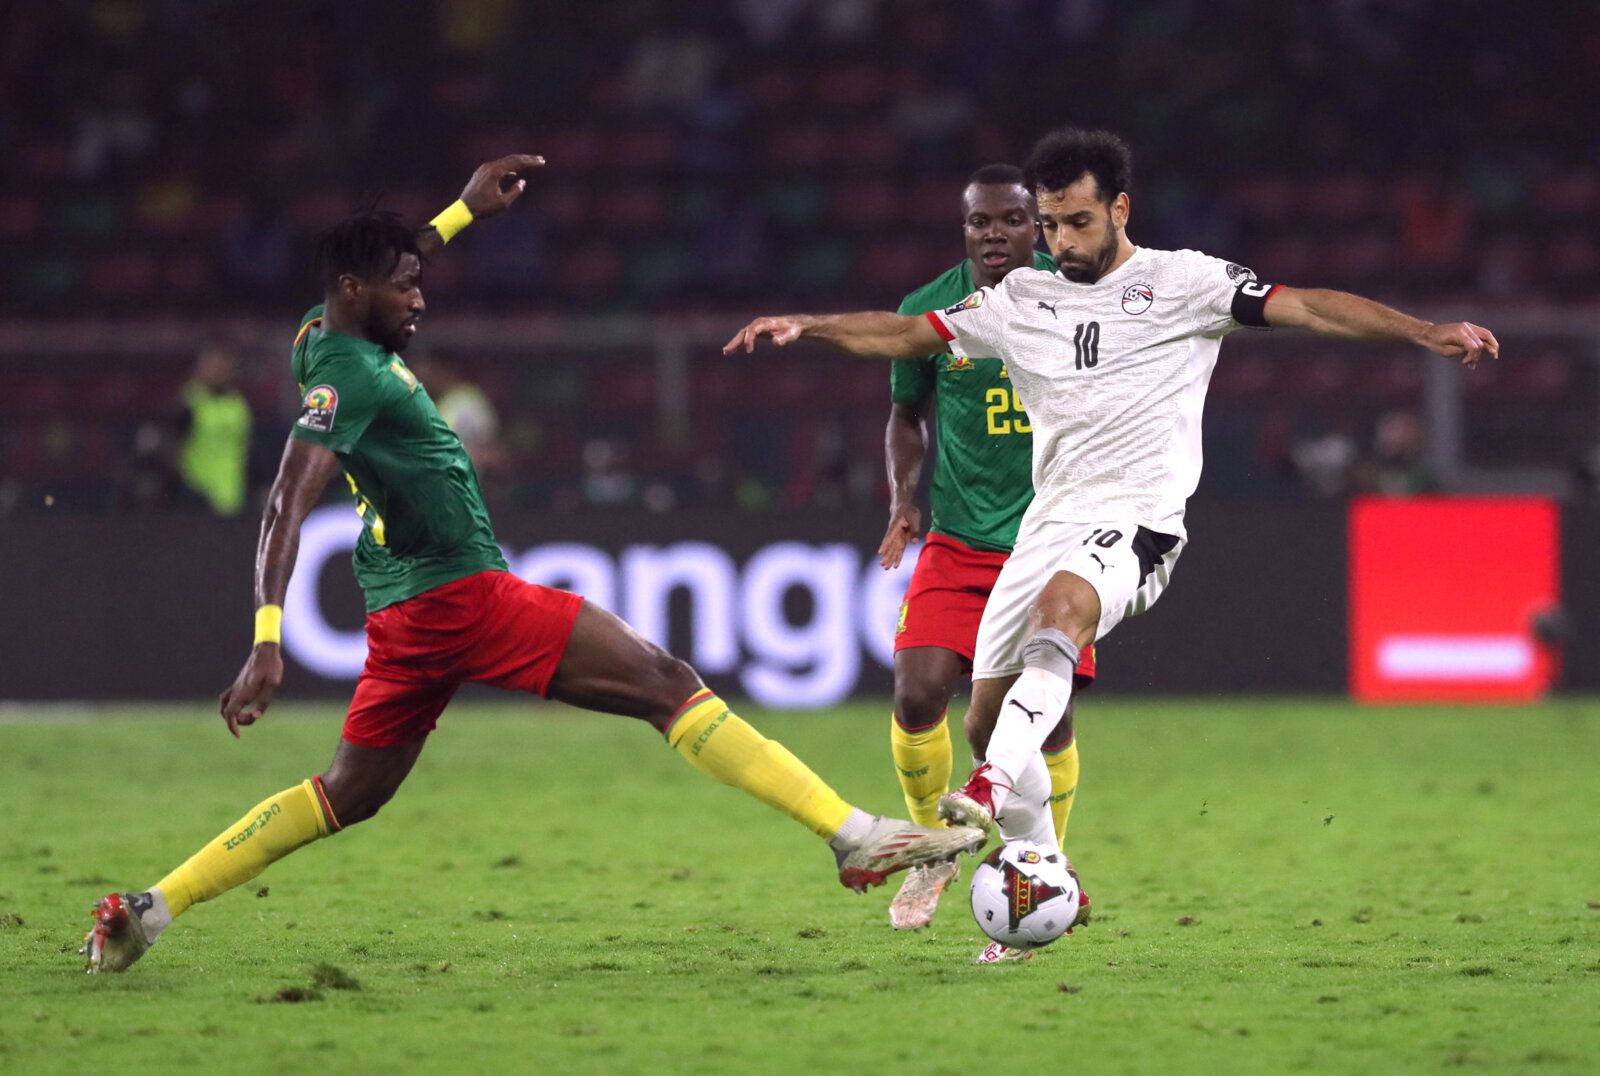 Soccer Football - Africa Cup of Nations - Semi Final - Cameroon v Egypt - Olembe Stadium, Yaounde, Cameroon - February 3, 2022  Cameroon's Andre-Frank Zambo Anguissa in action with Egypt's Mohamed Salah REUTERS/Mohamed Abd El Ghany